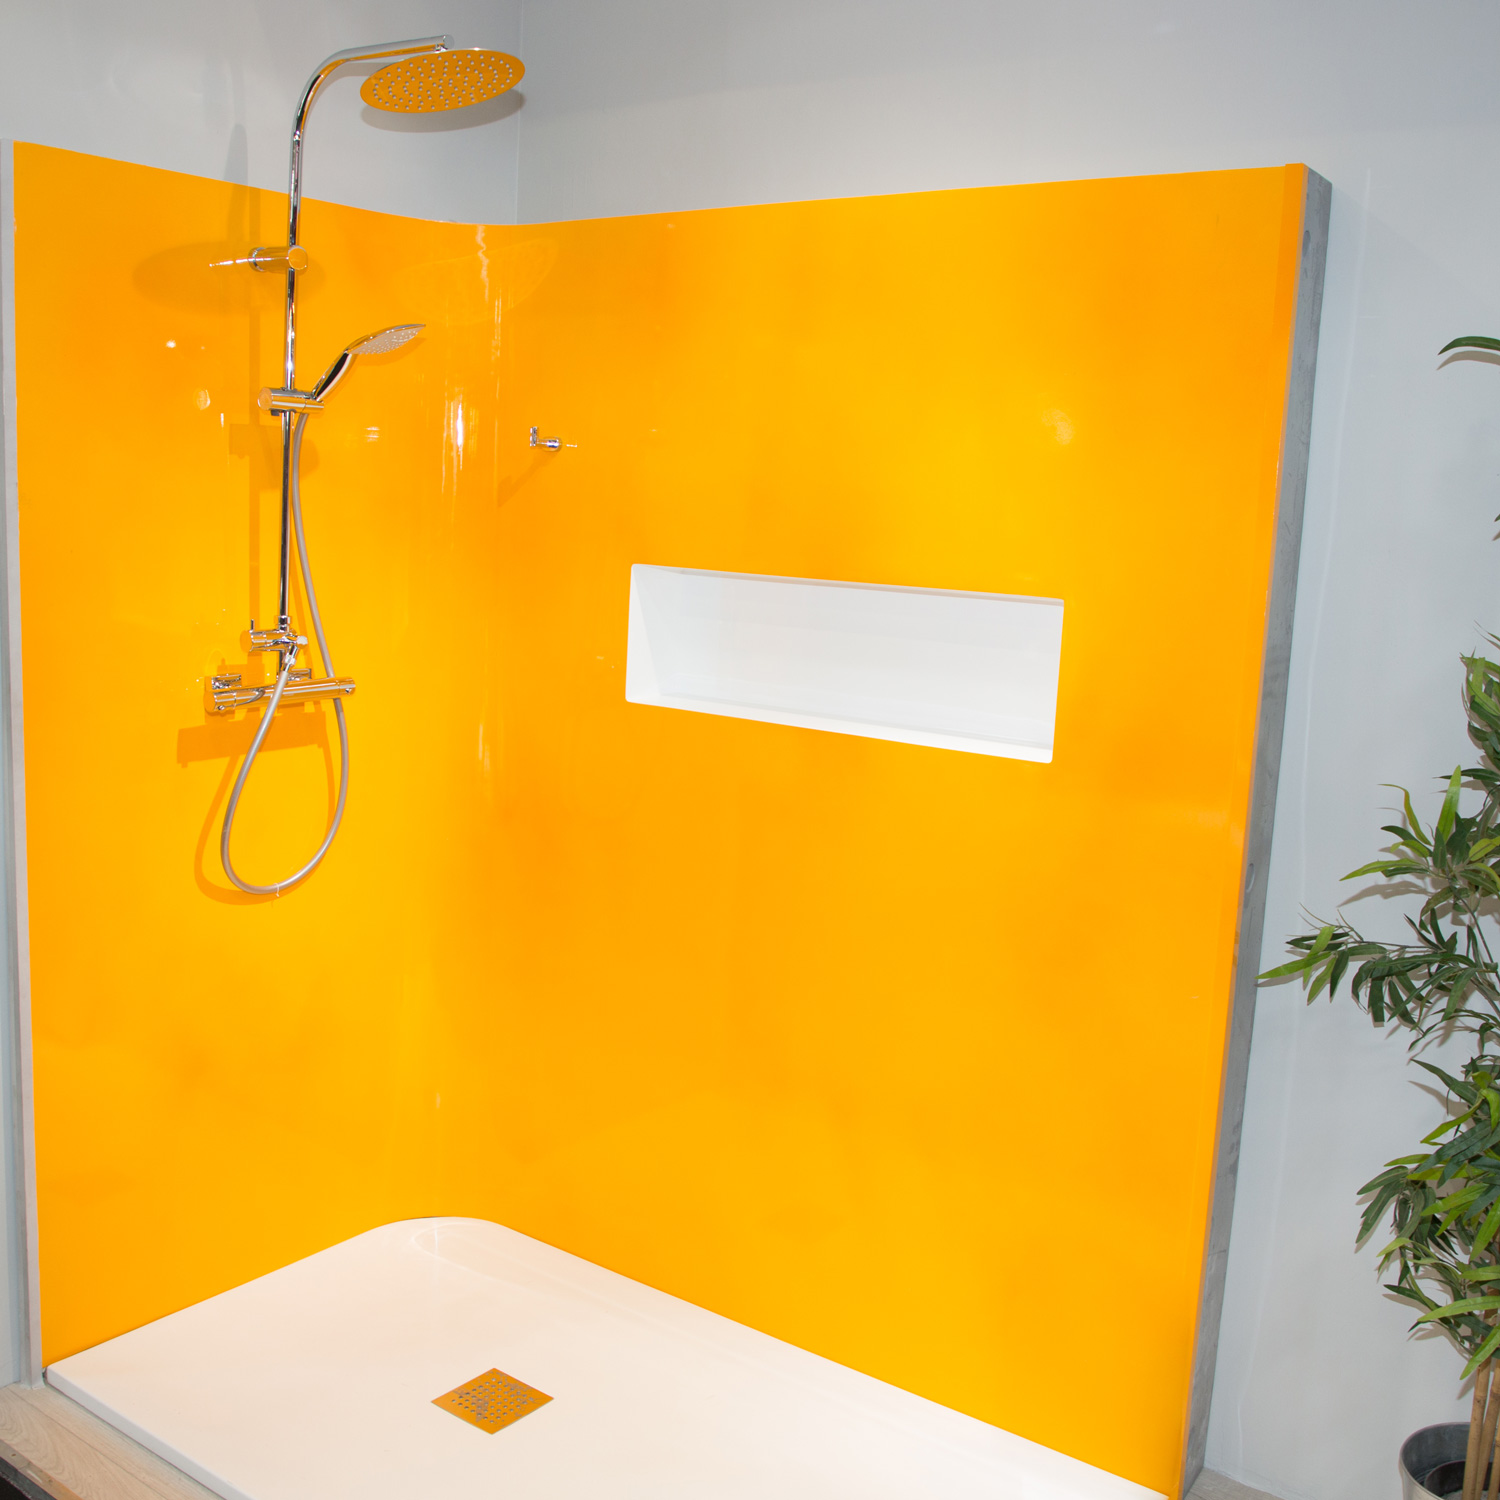 new concept of fiberglass or gelcoat shower in orange in apartment home house